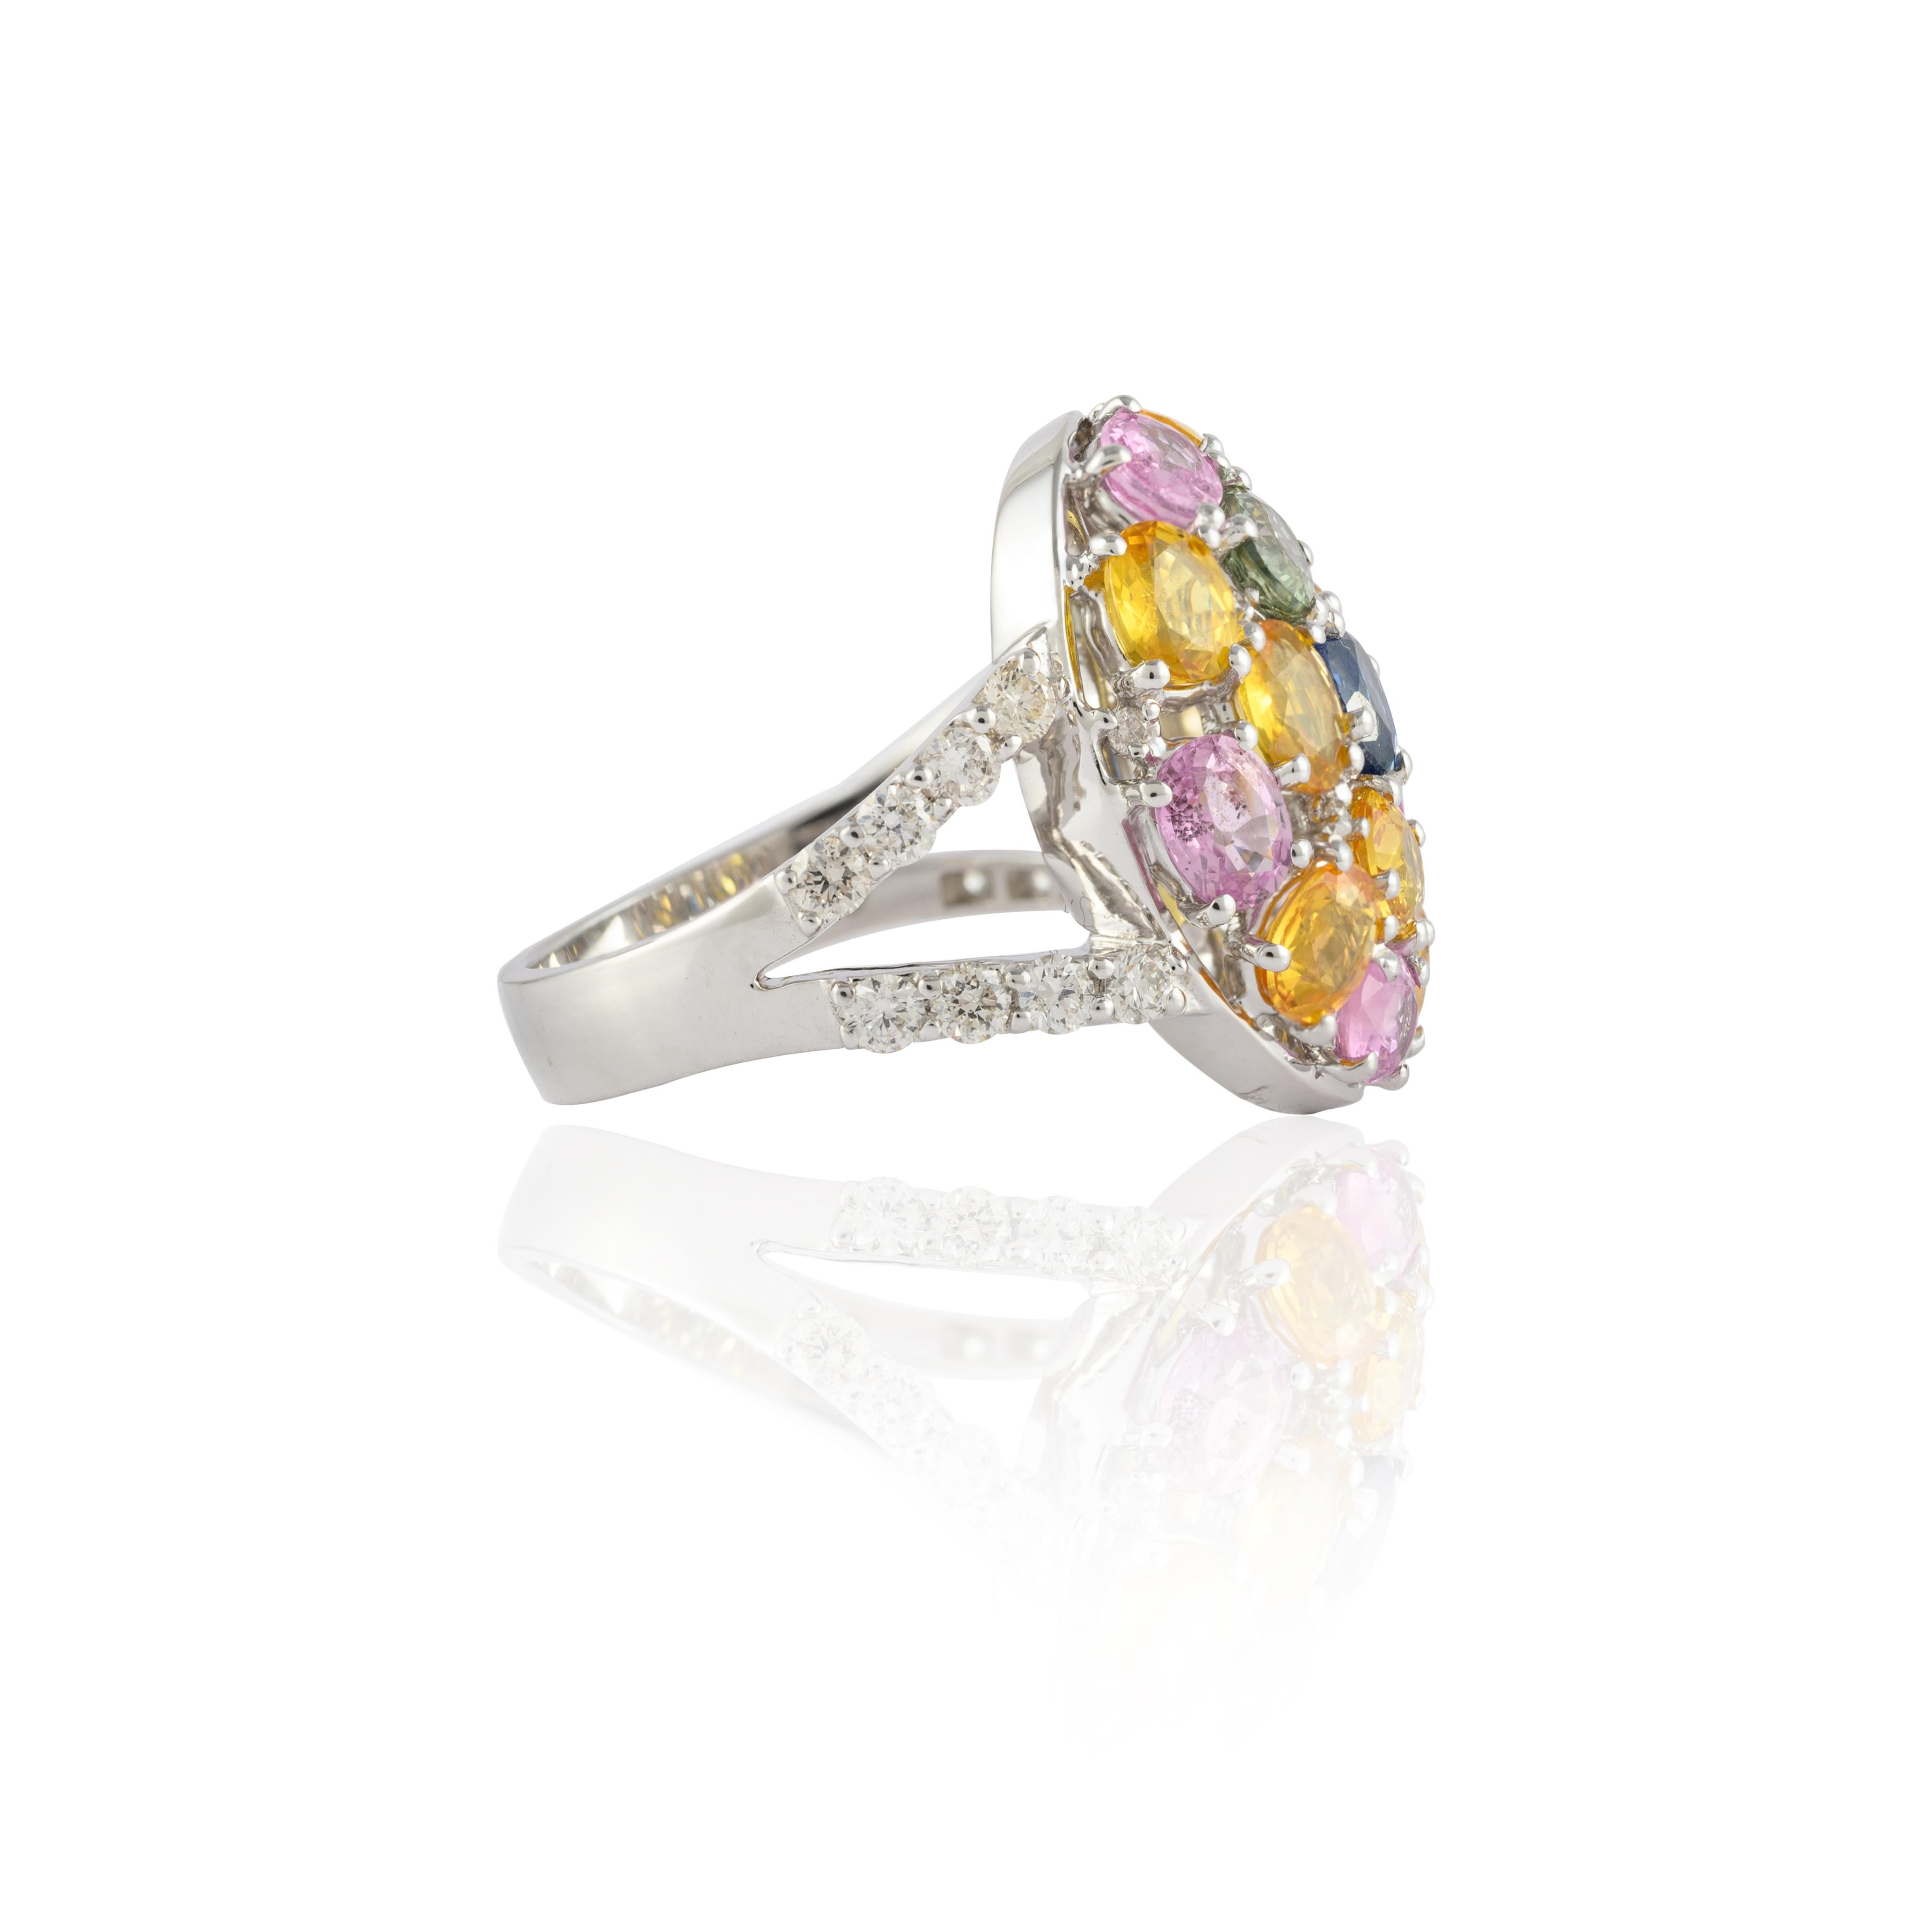 For Sale:  Statement Solid 18k White Gold 5.09 Carat Multi Sapphire Diamond Cocktail Ring 5